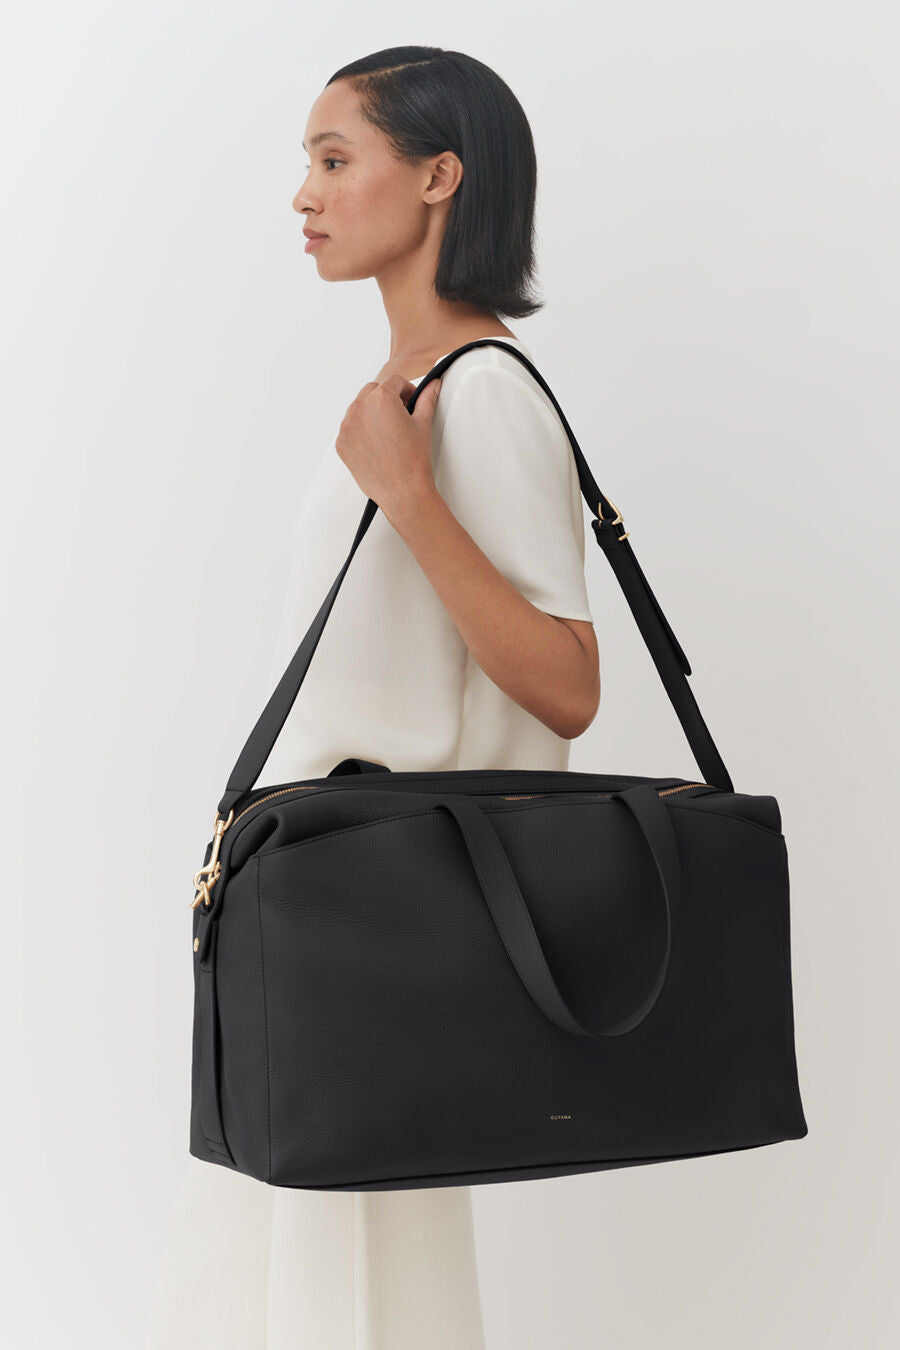 Oversized Black Leather bag with zip and inside lining with 4